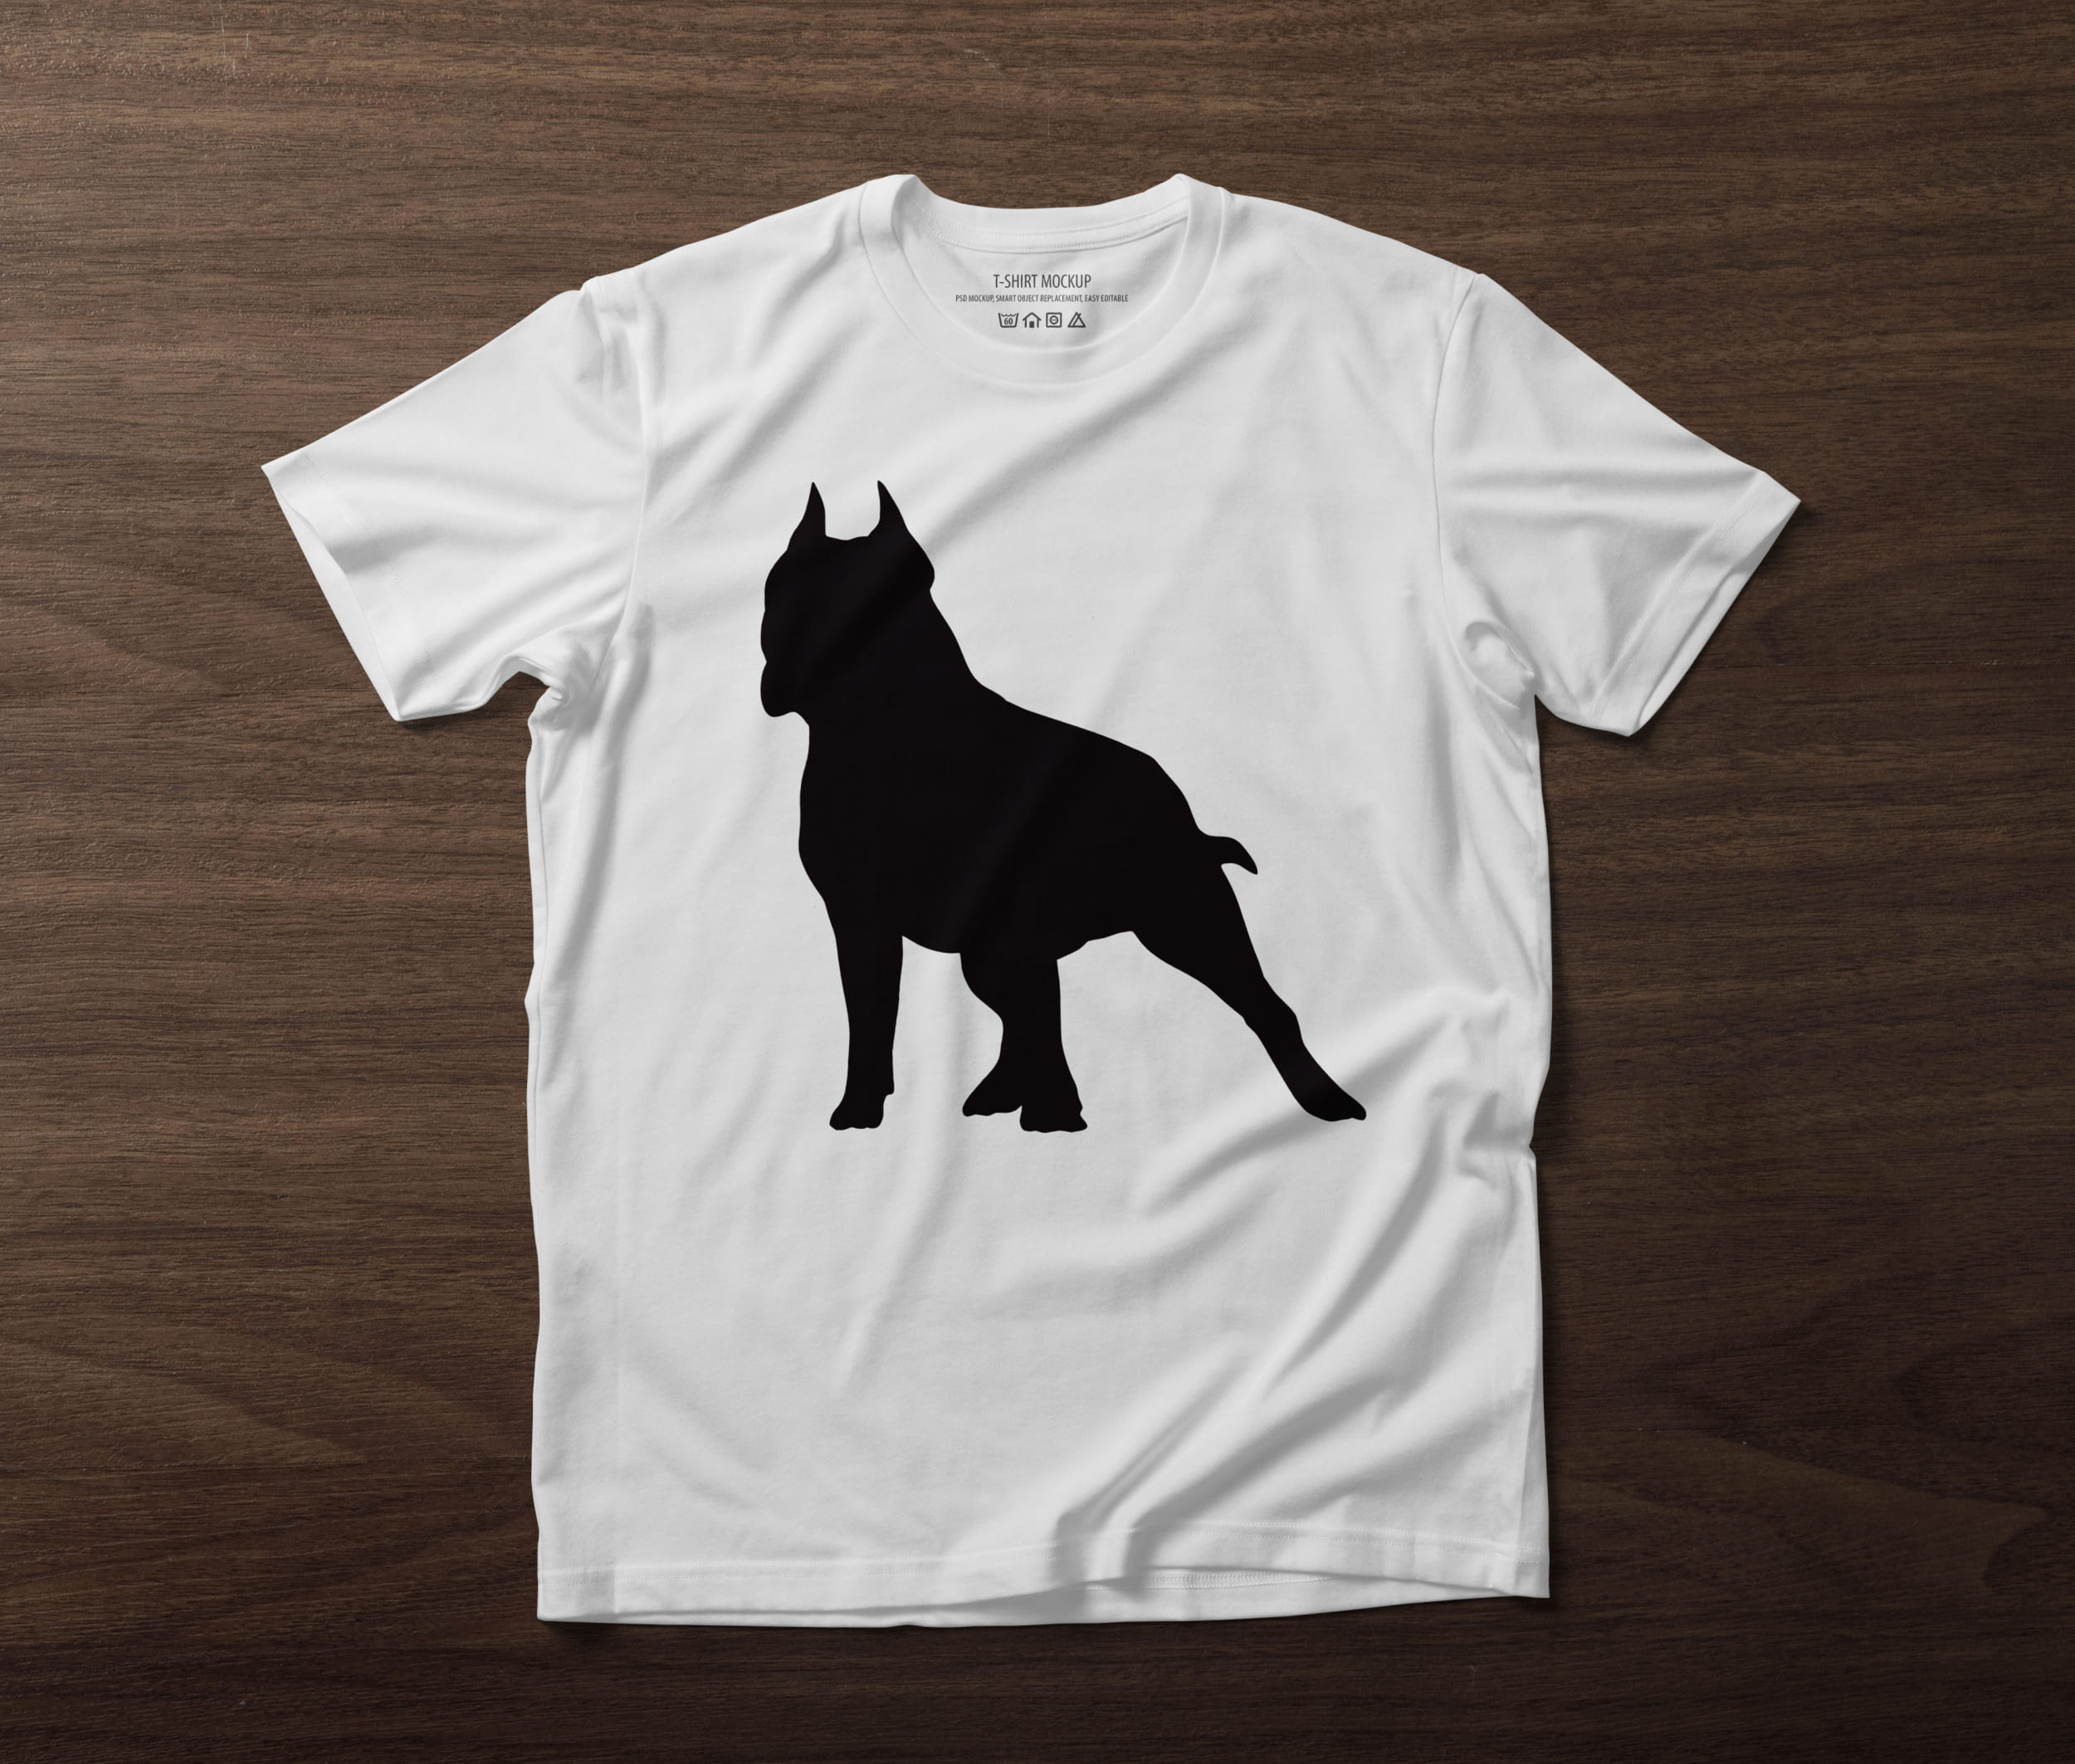 White t-shirt with a black pitbull silhouette on the table.